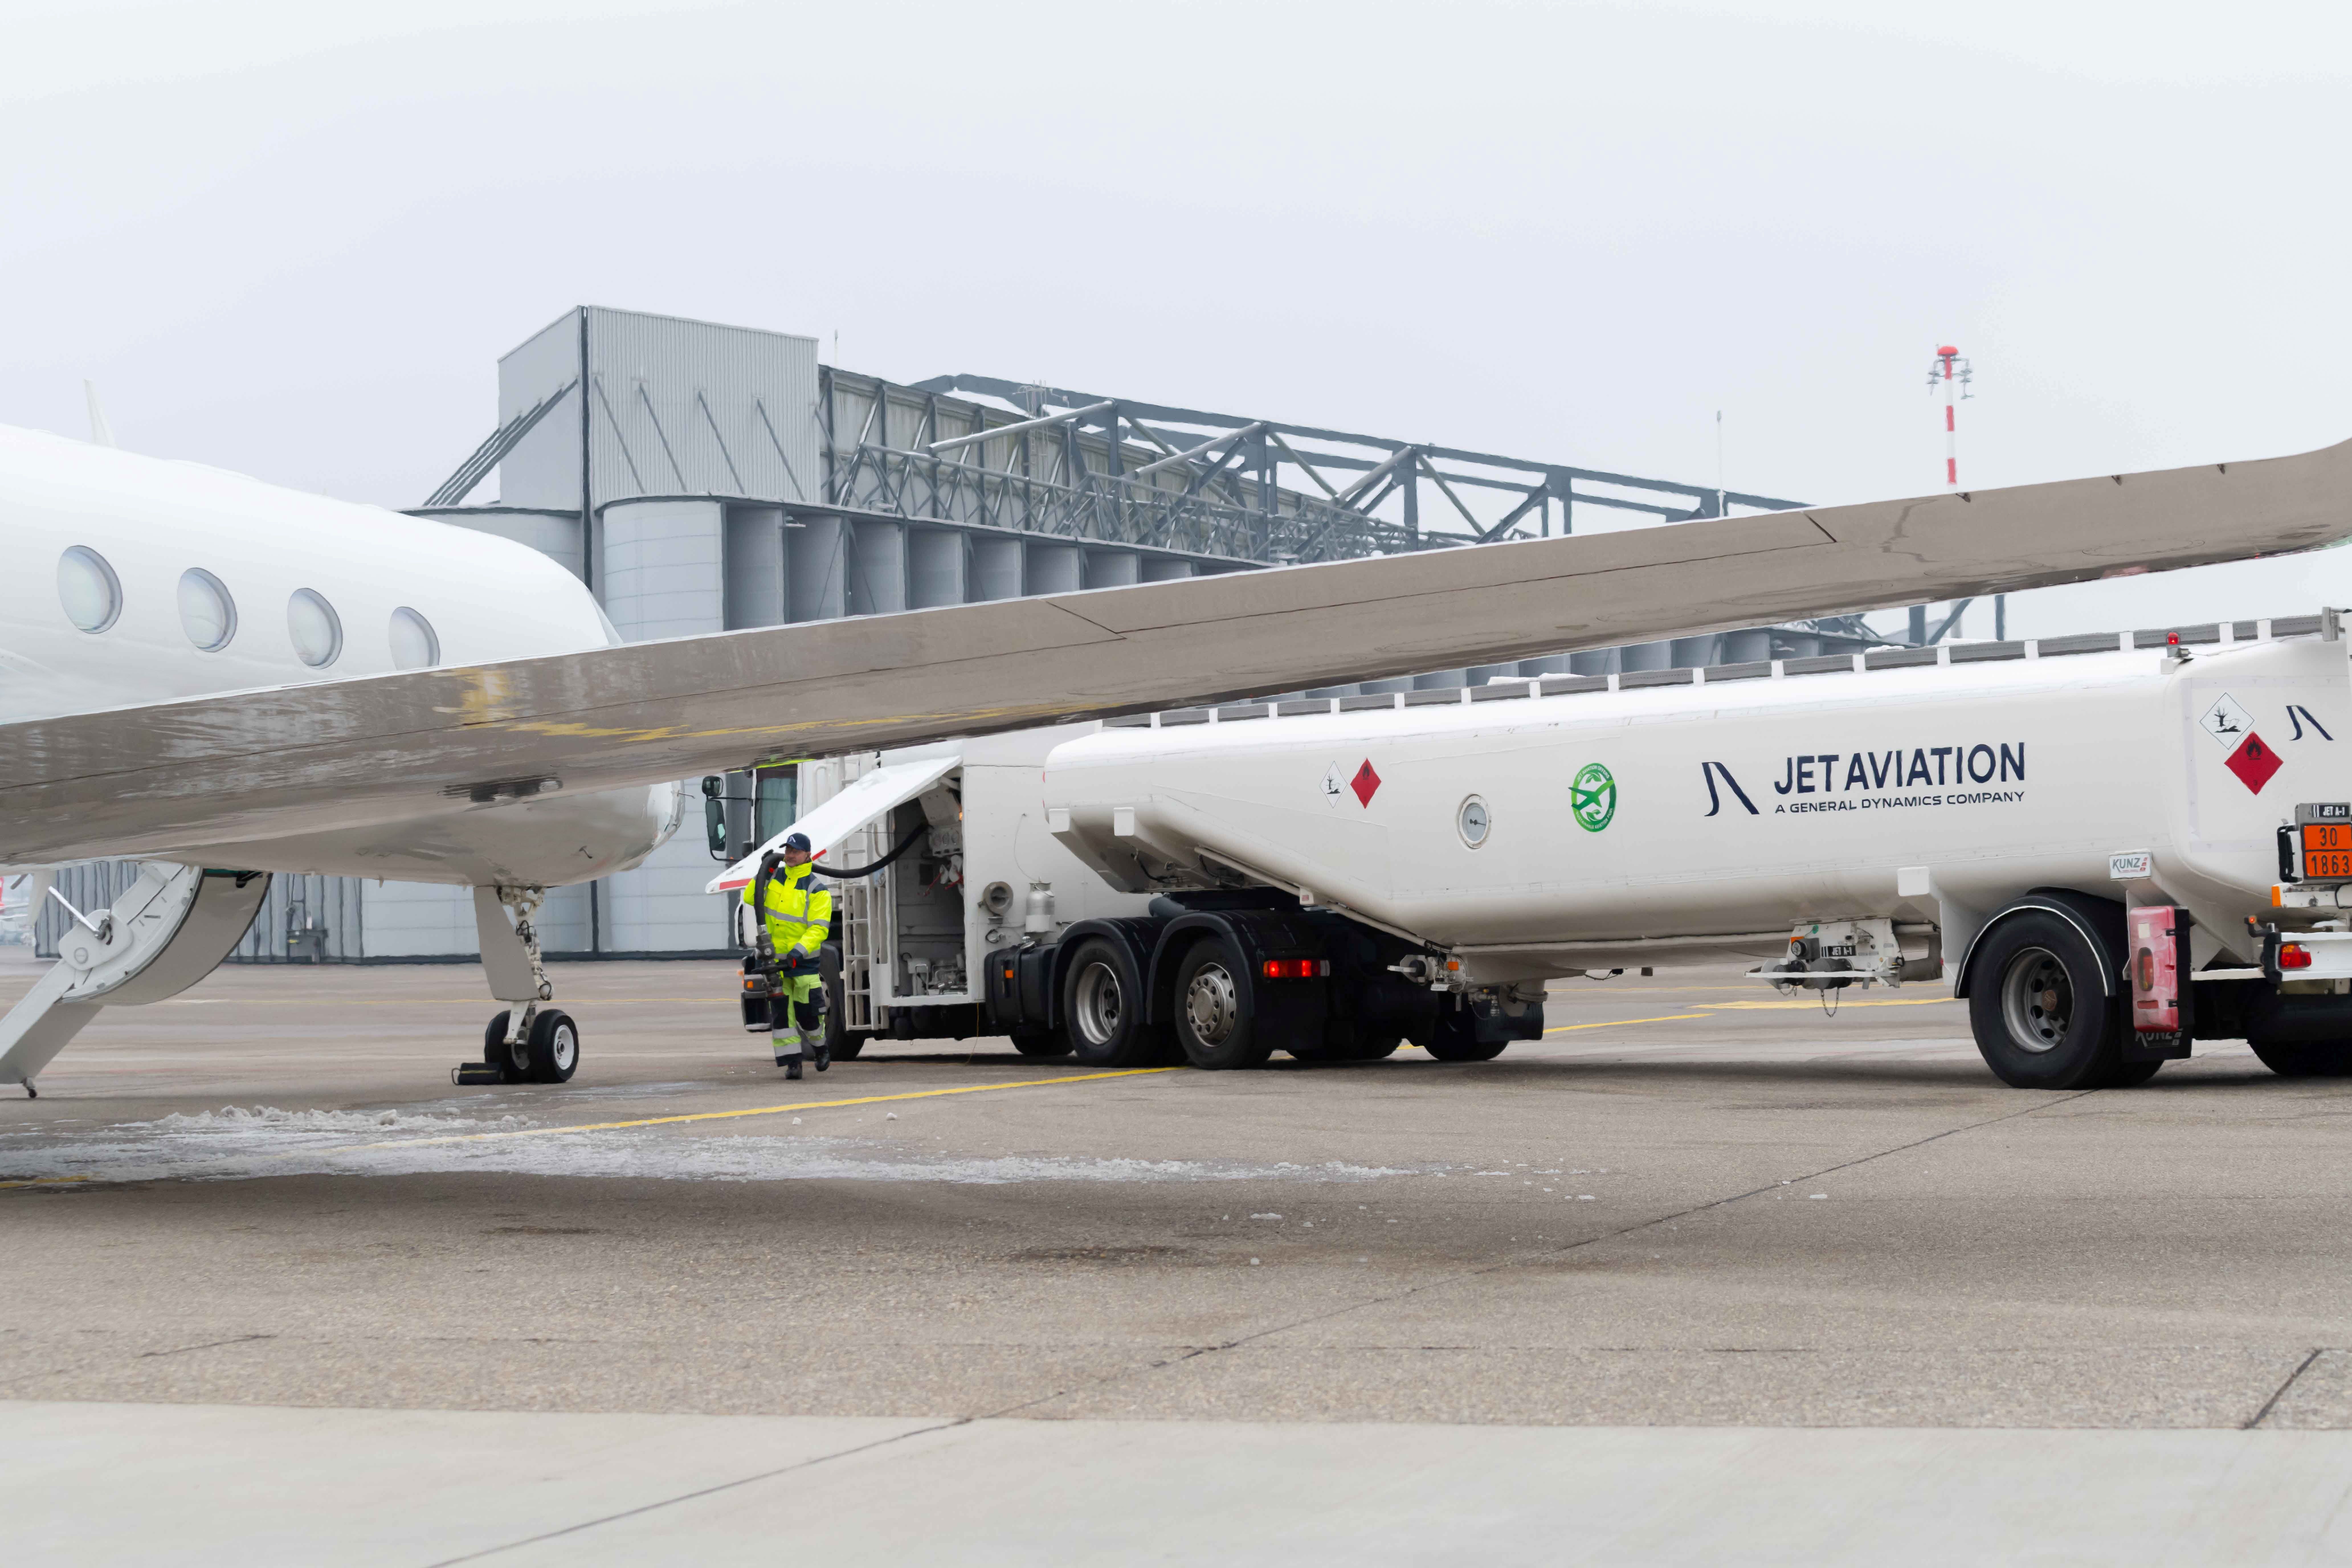 The Unimot Group will expand its aviation fuel business under the AVIA brand  - UNIMOT S.A